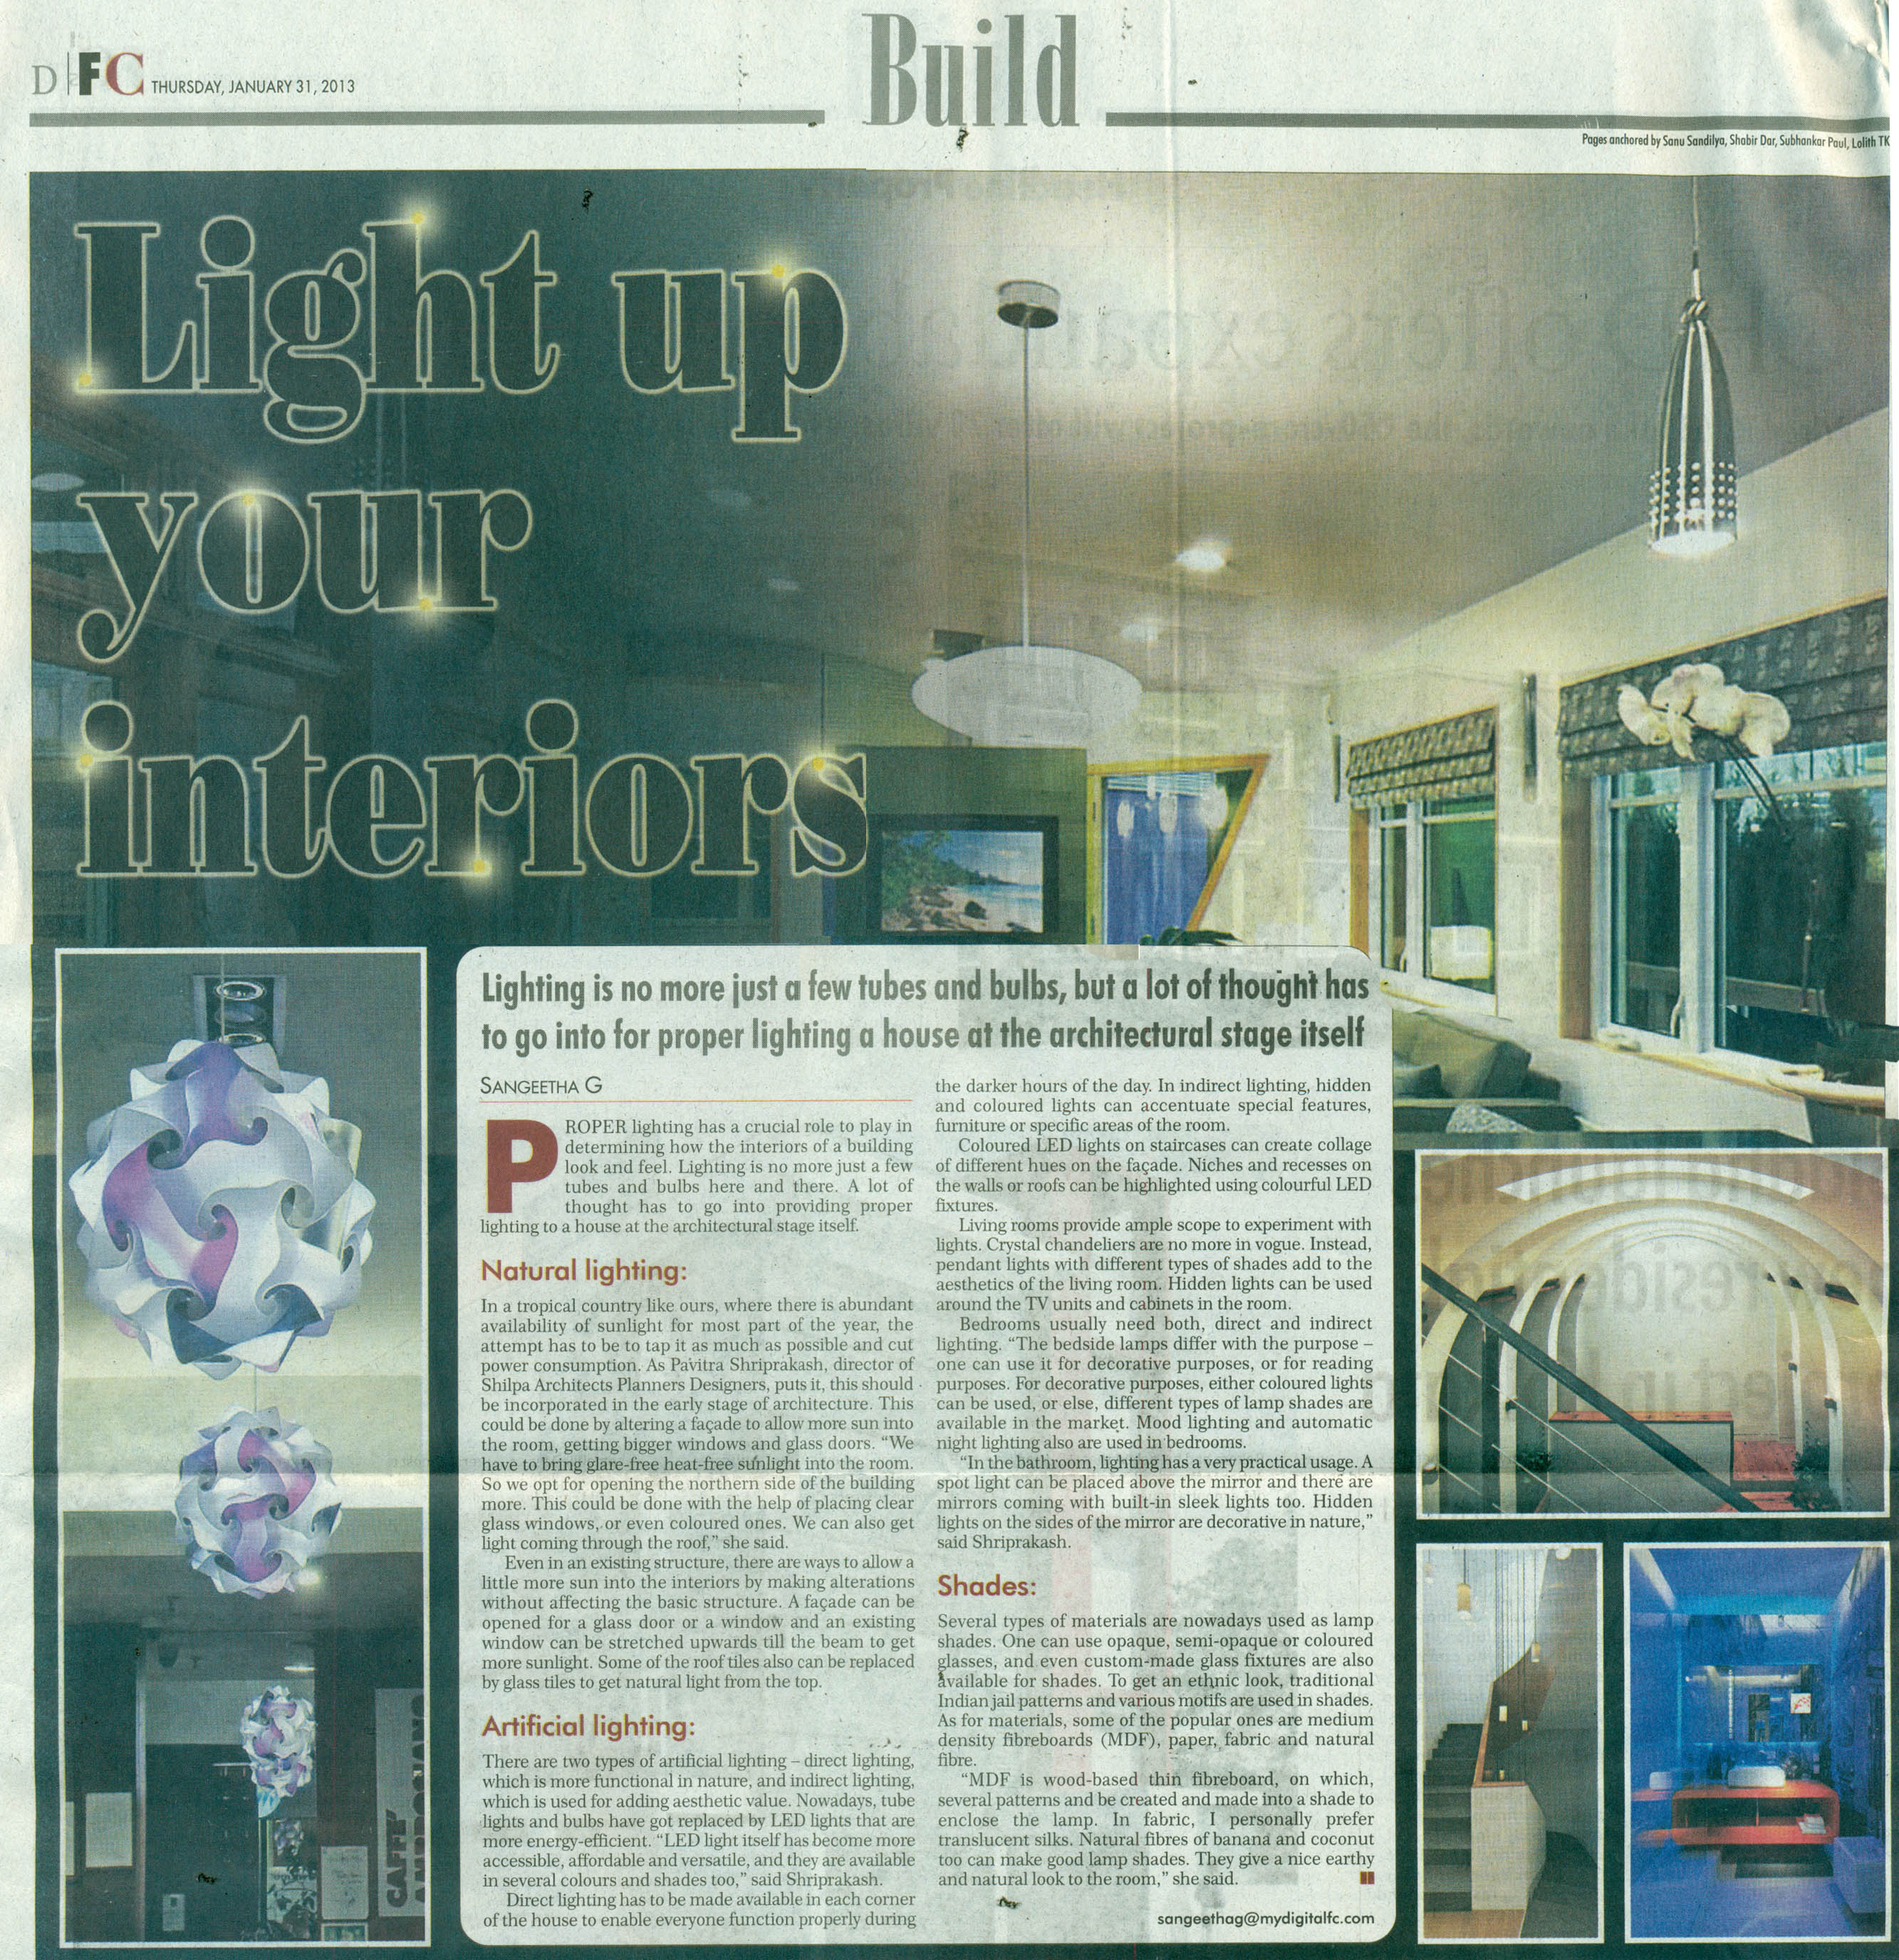 Financial Chronicle, 31 Jan 2013: Light up your interiors with Pavitra Sriprakash, Chief Designer at Shilpa Architects.